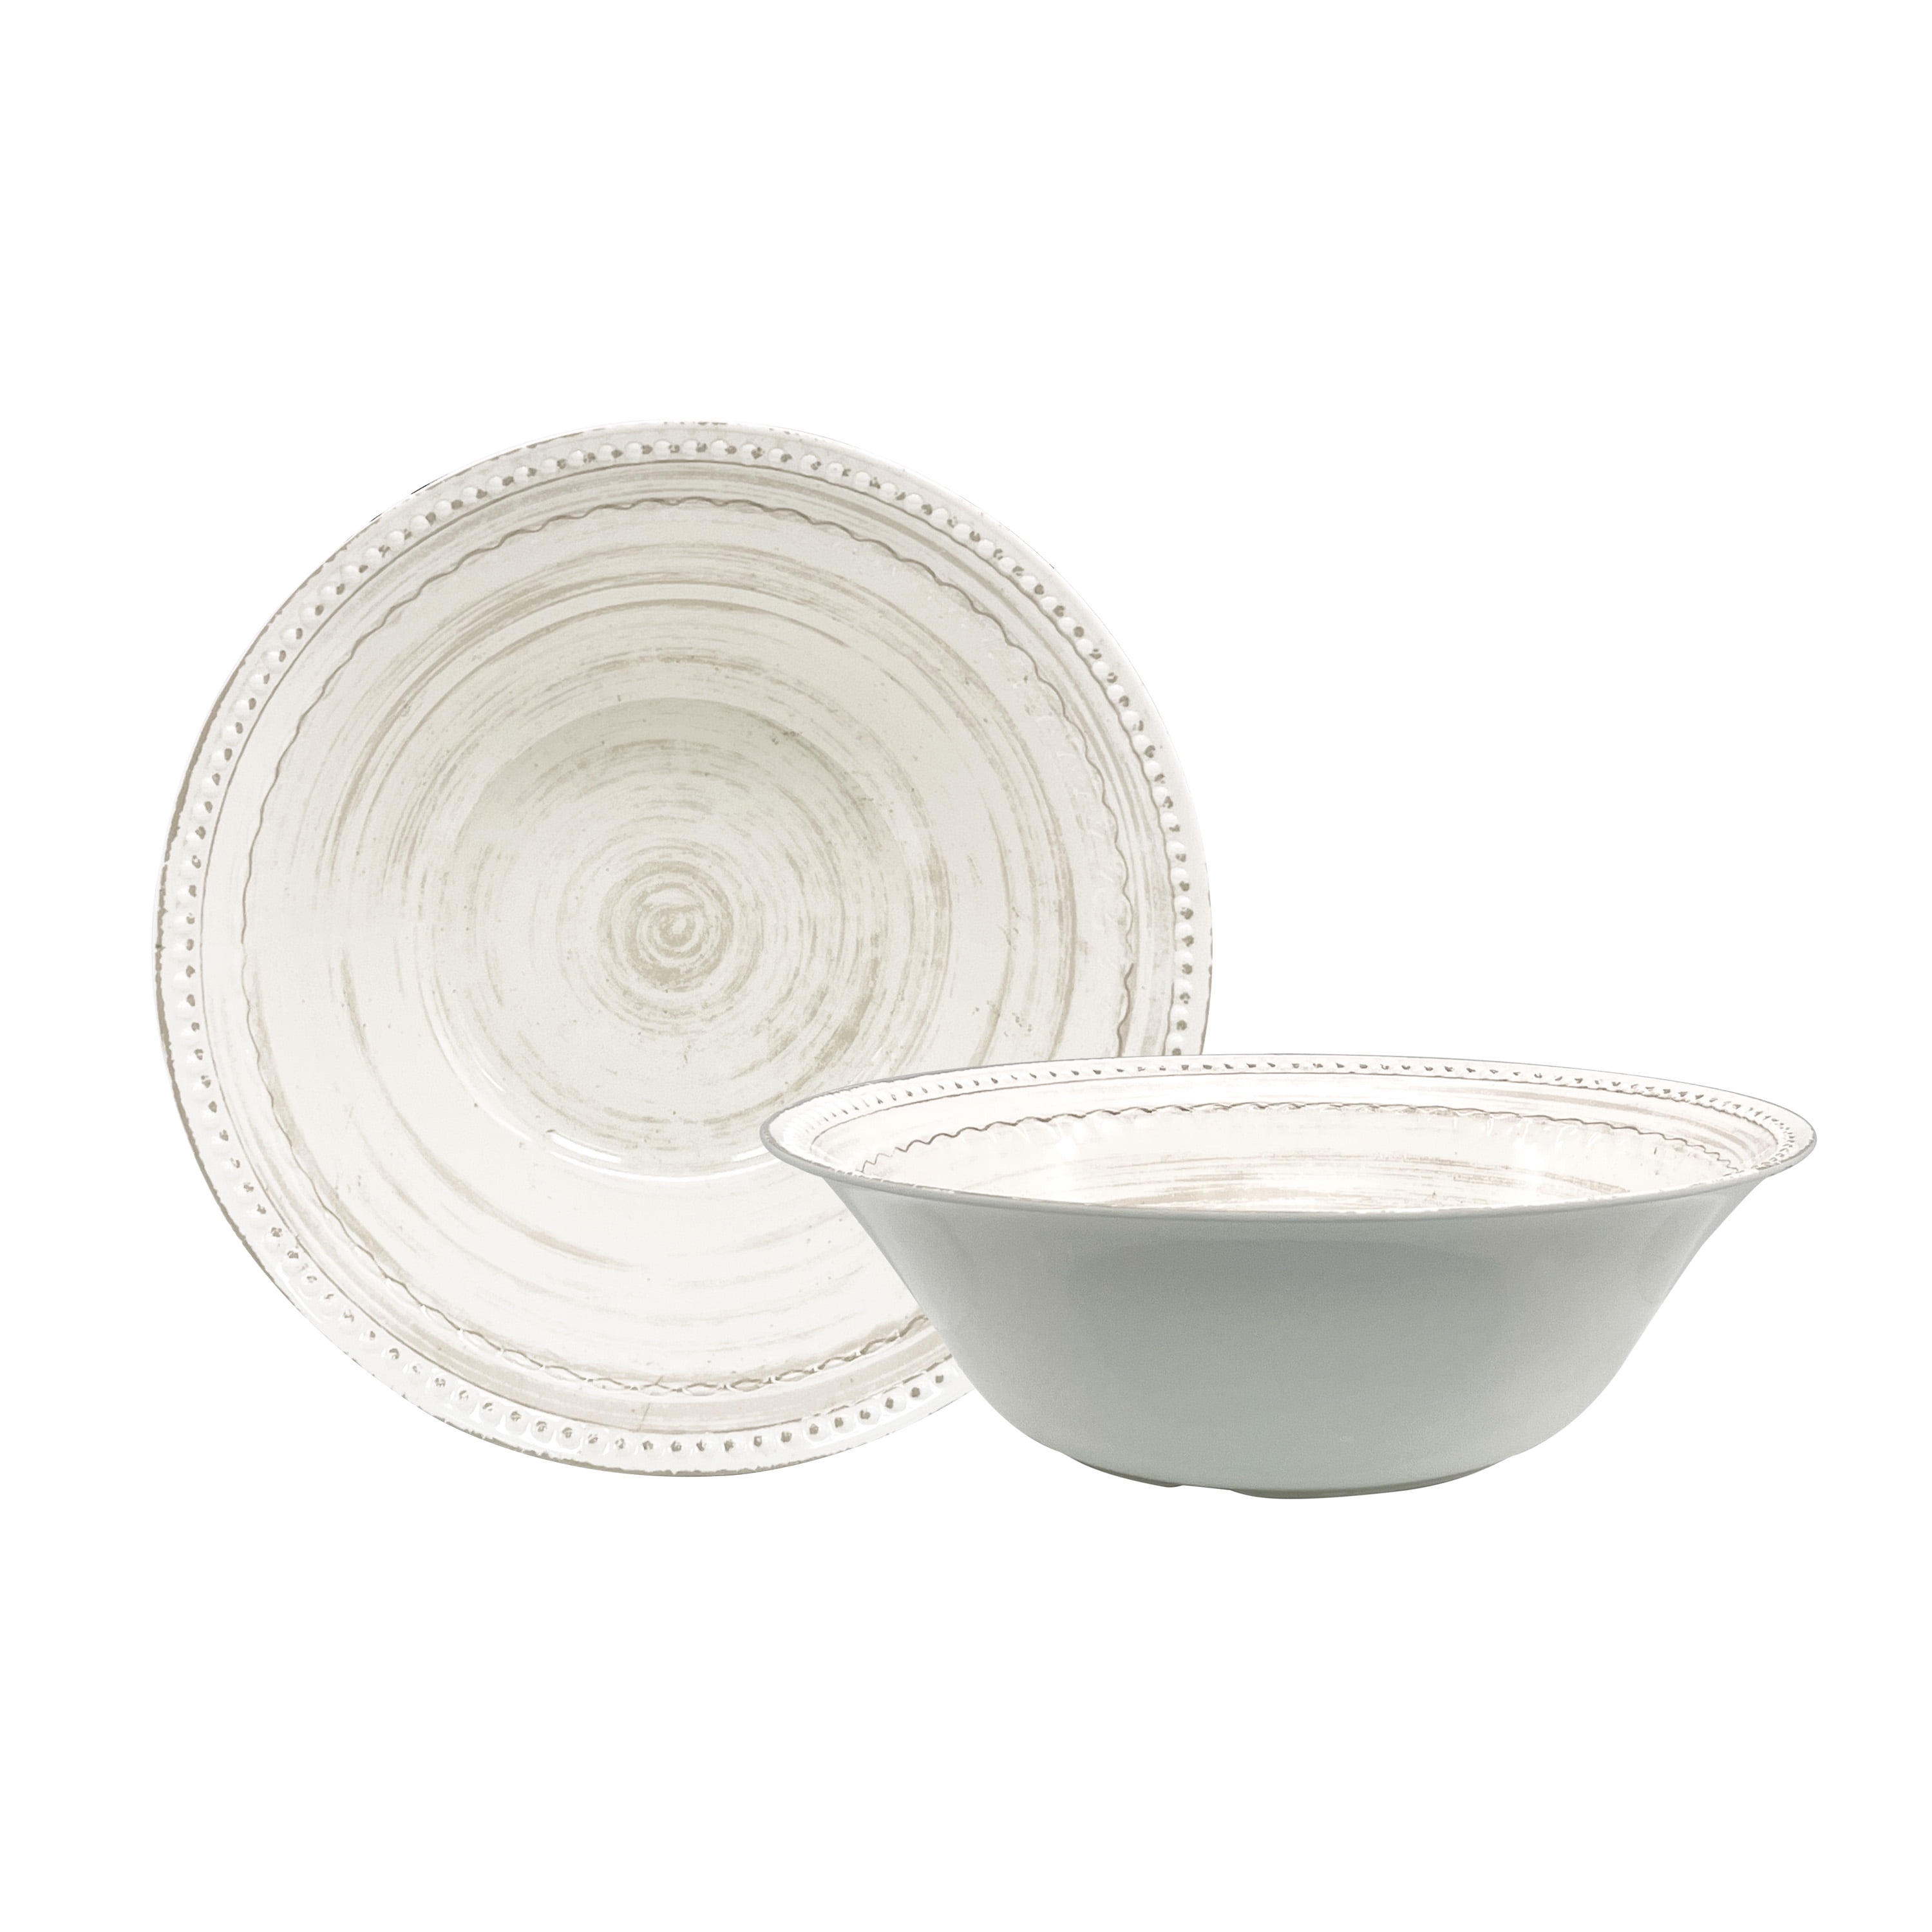 Zak Designs French Country House Melamine Oval Serving Platter Durable and BPA Free 16 inches, Lavage Oyster 